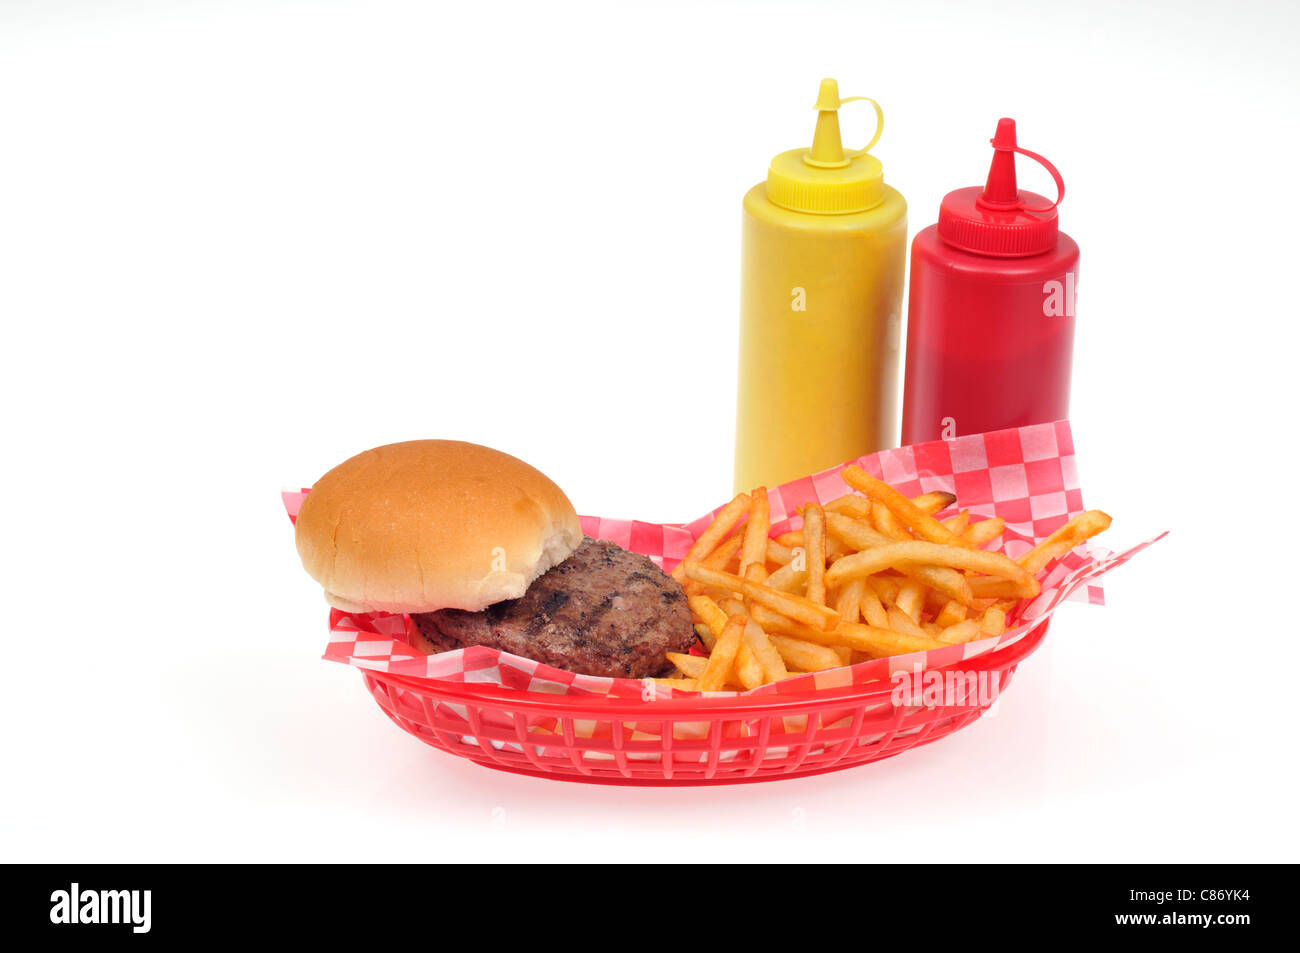 Hamburger With French Fries In A Red Plastic Retro Basket With Mustard